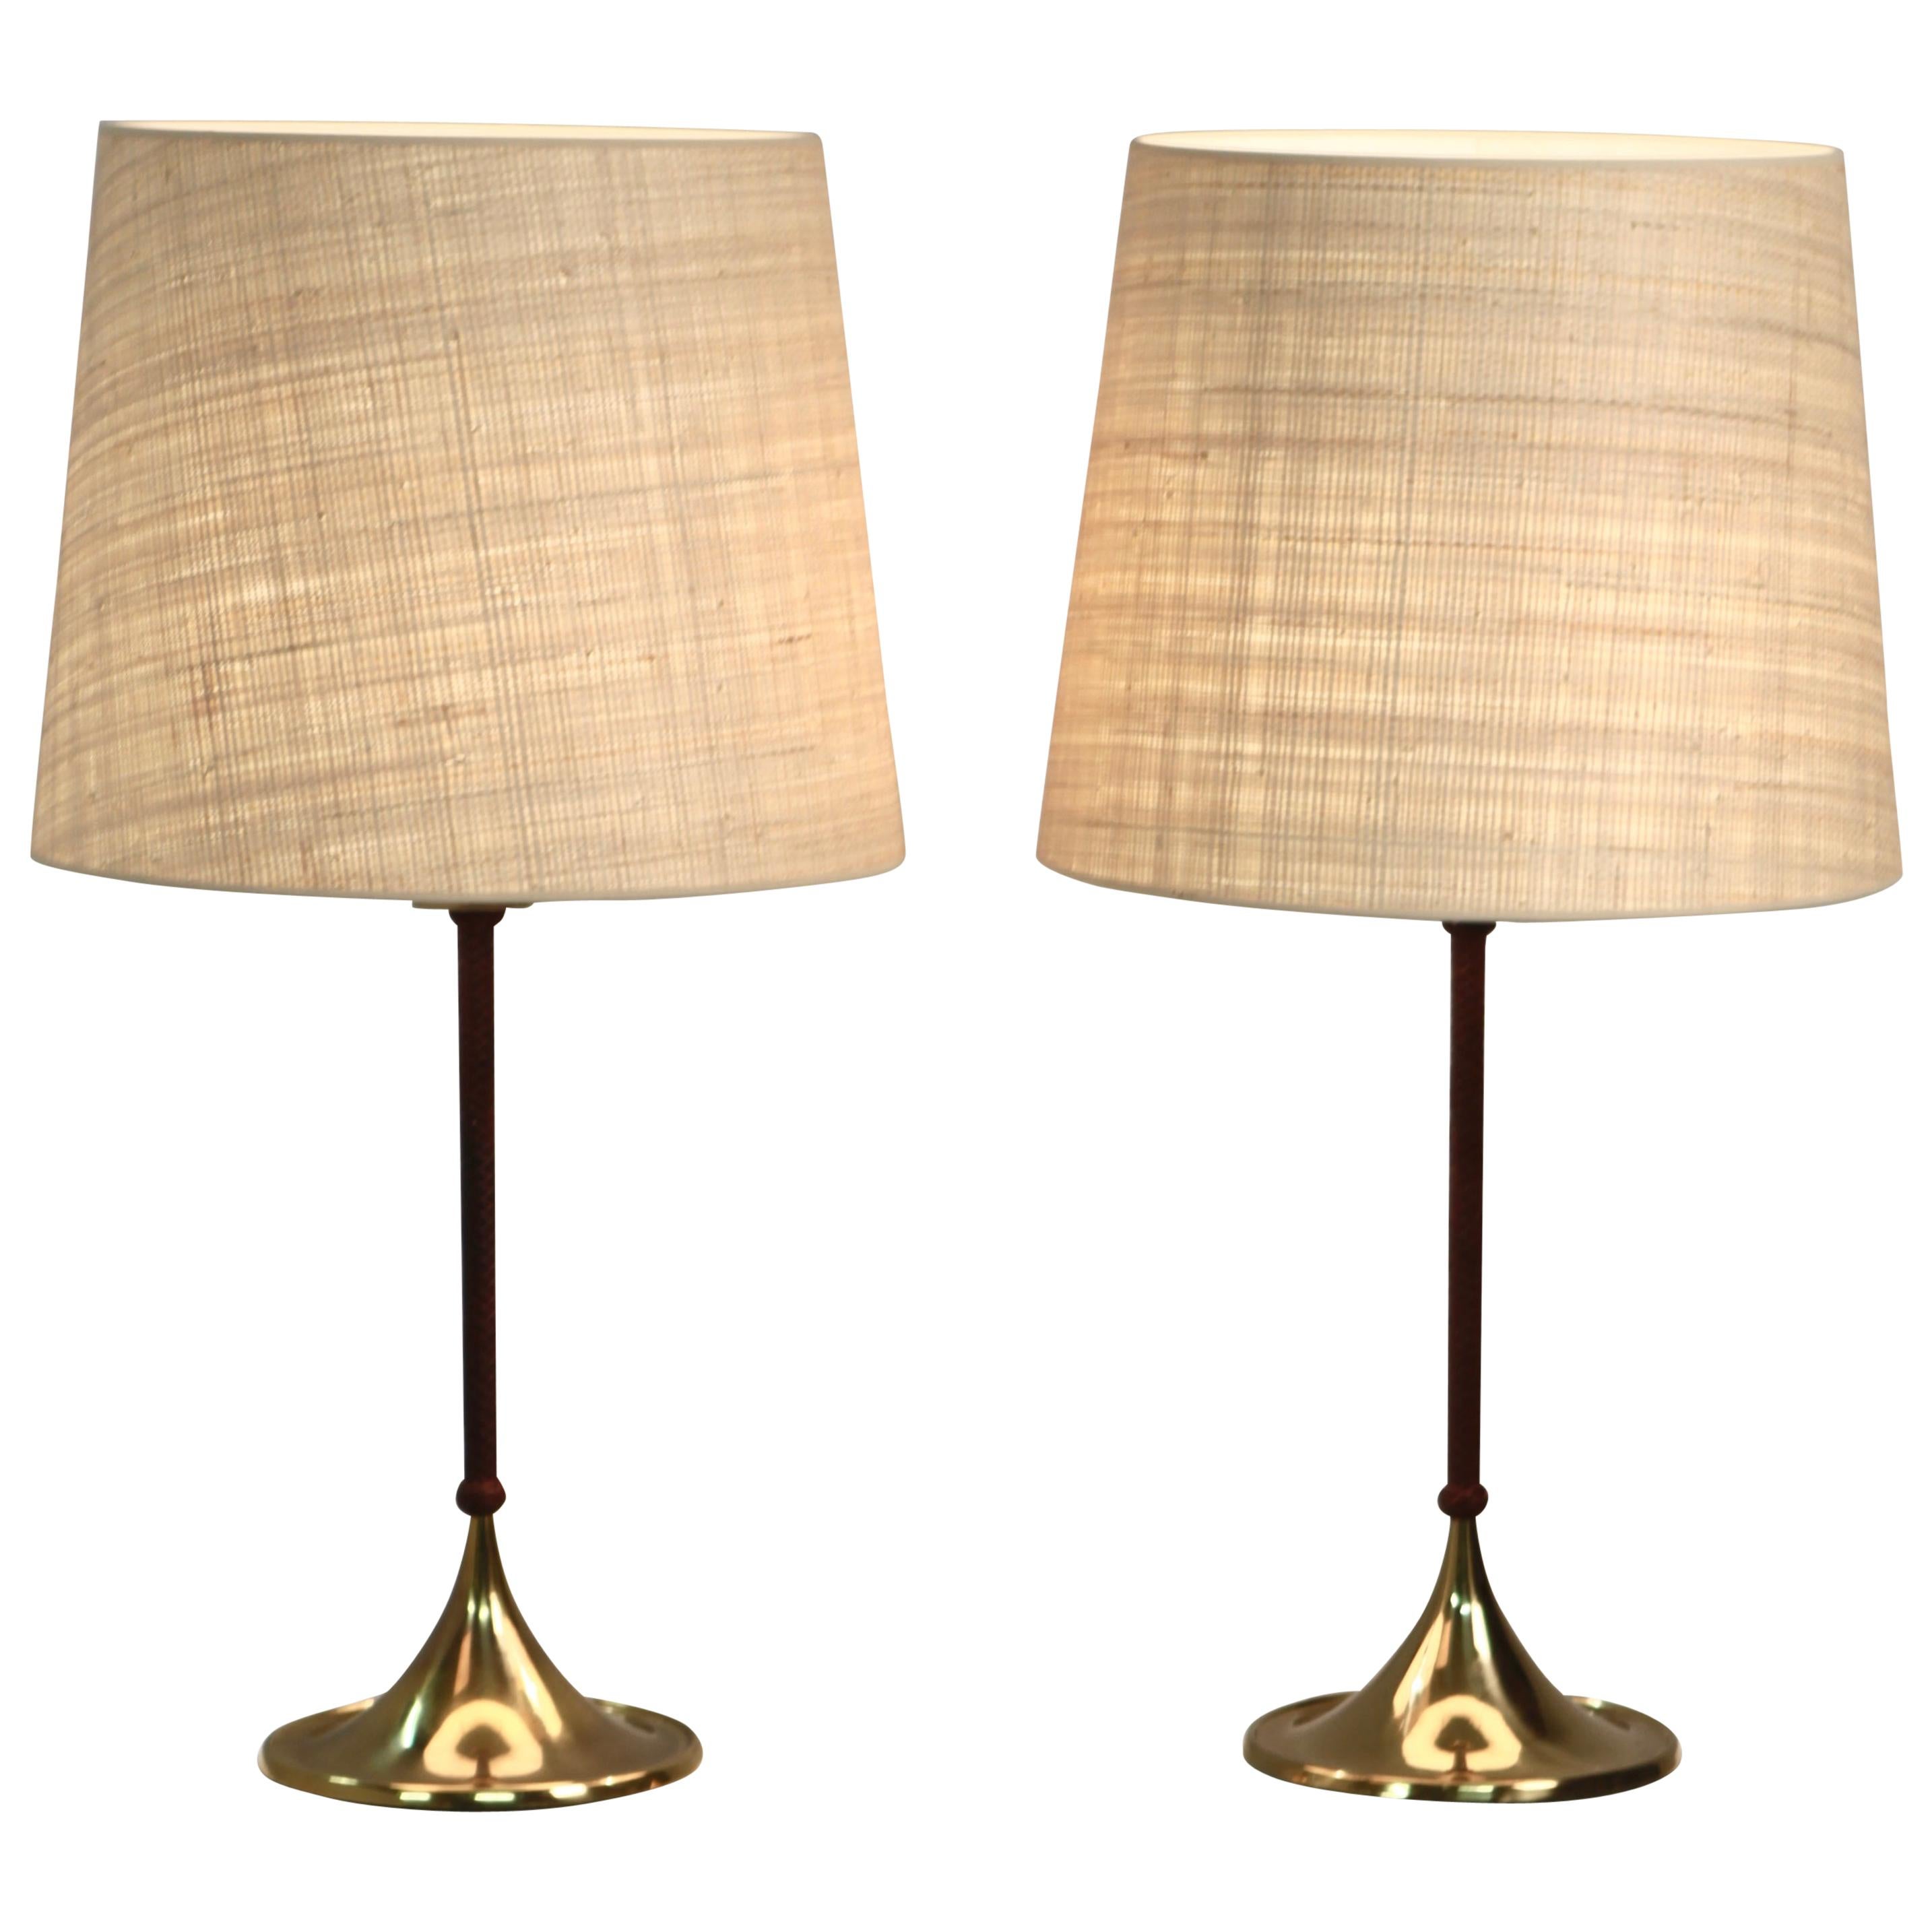 Pair of Rare Bergboms Table Lamps, B-024, Brass and Leather, Sweden, 1950s